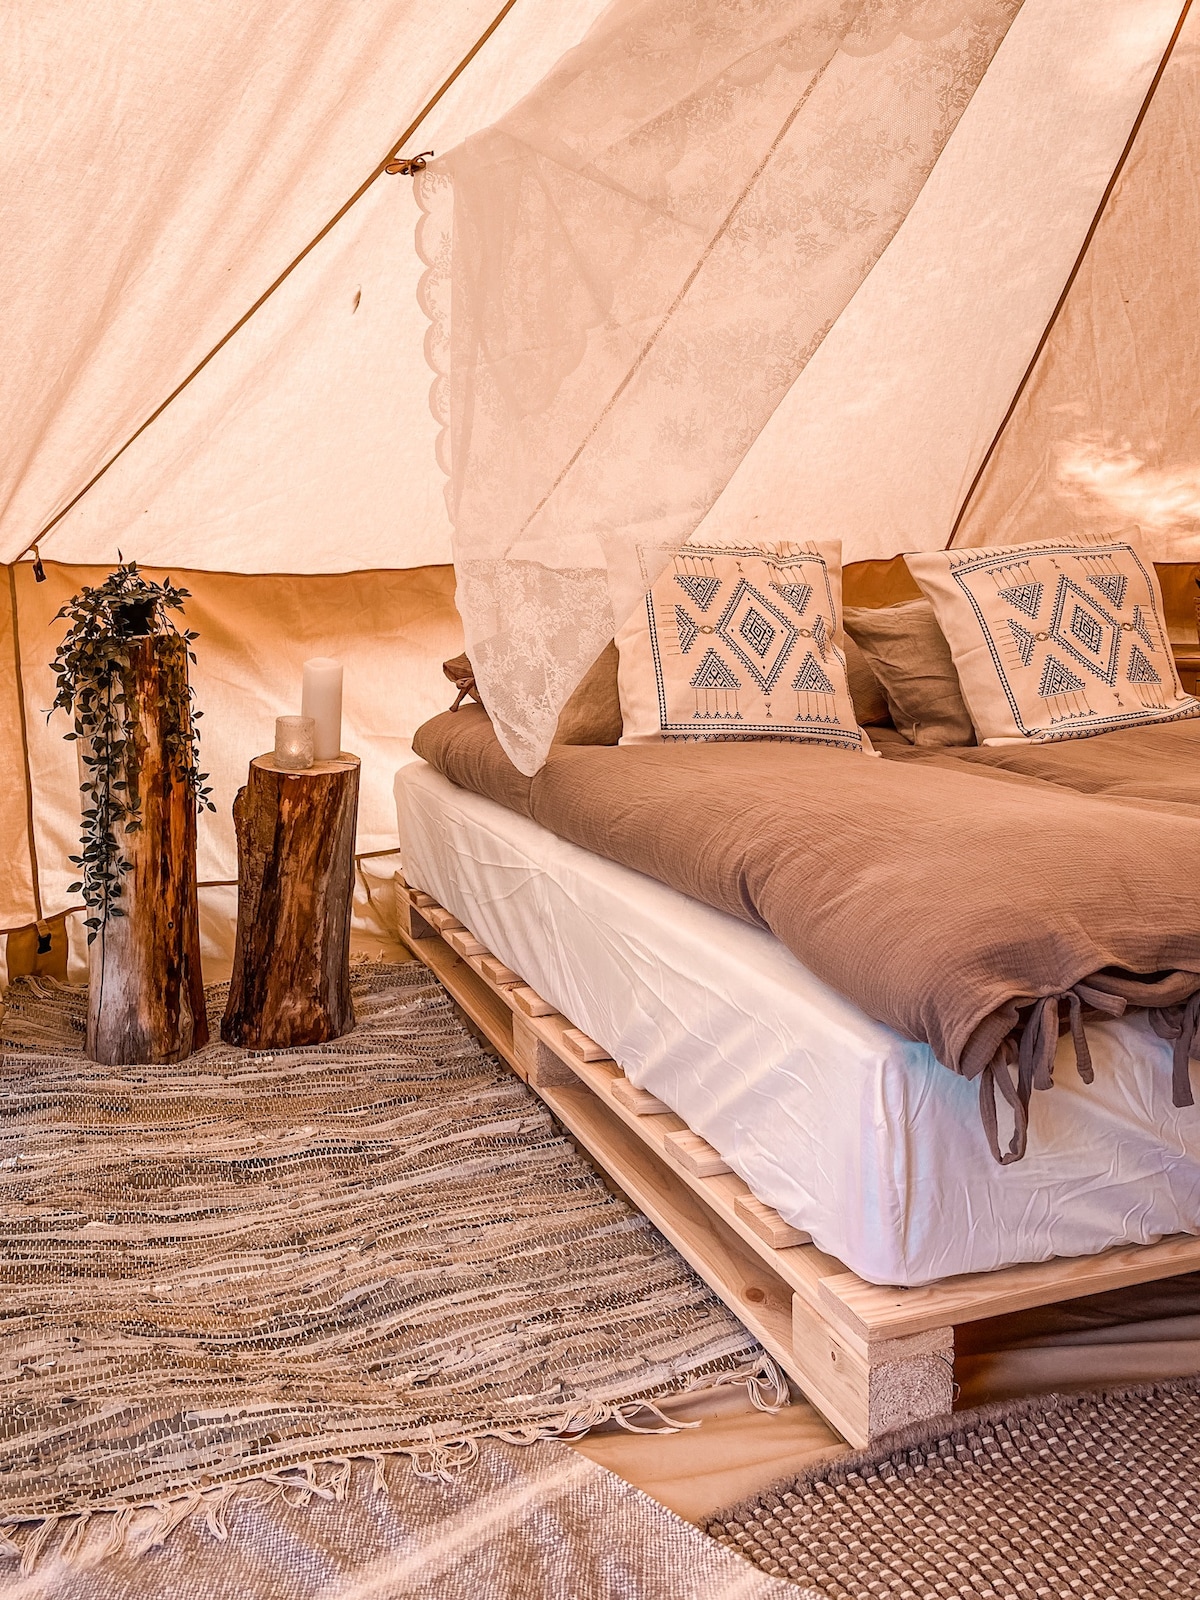 Glamping BohoFYN take away from the busy everyday